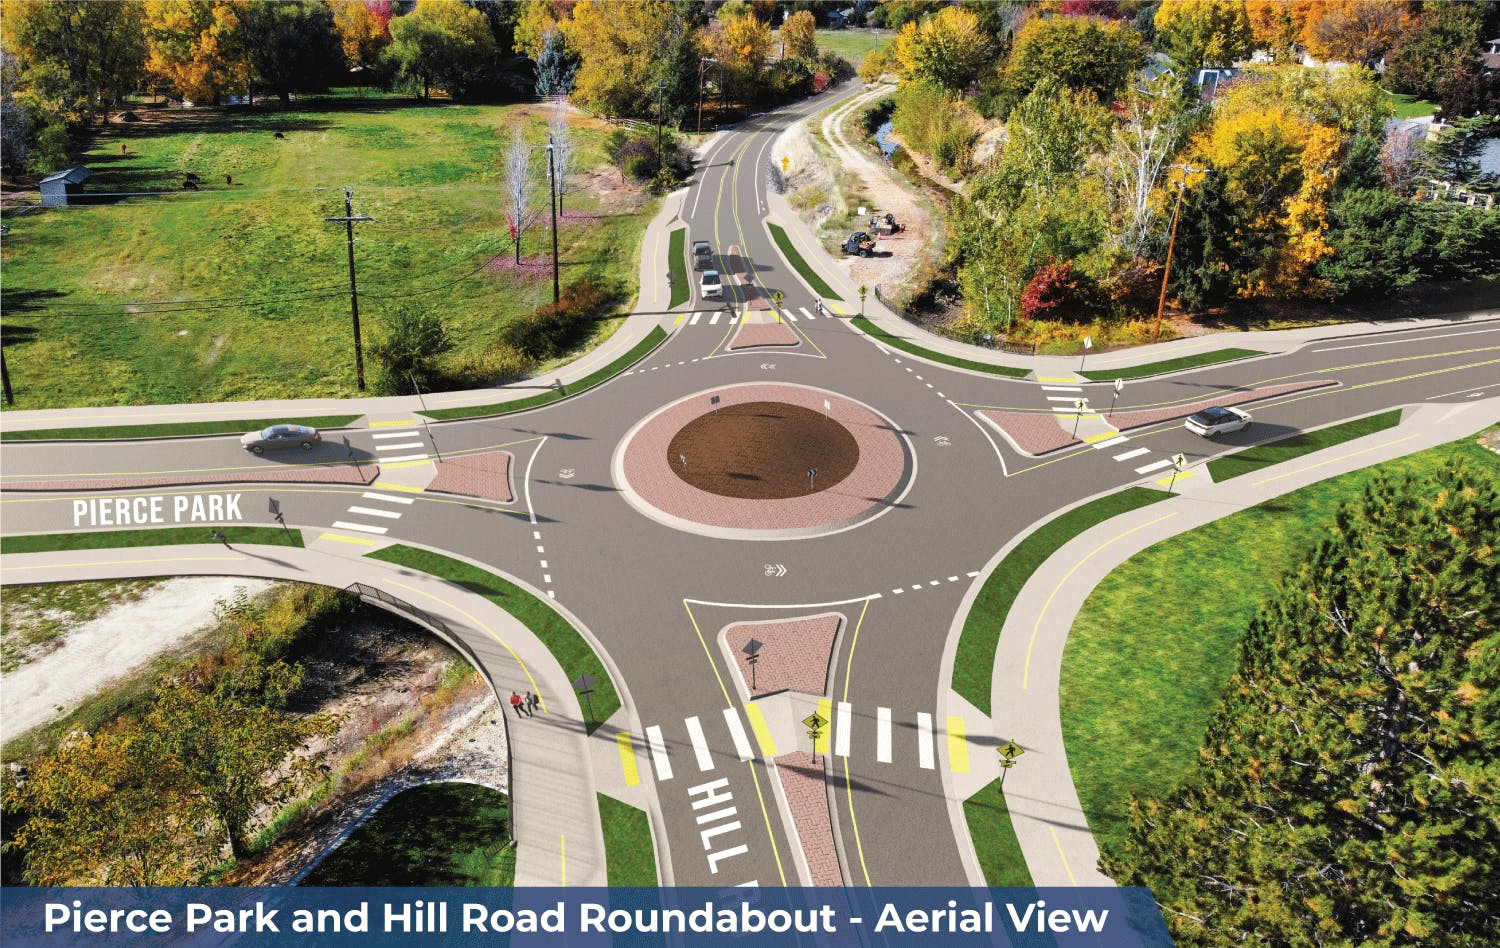 Pierce Park and Hill Road Roundabout - Aerial View